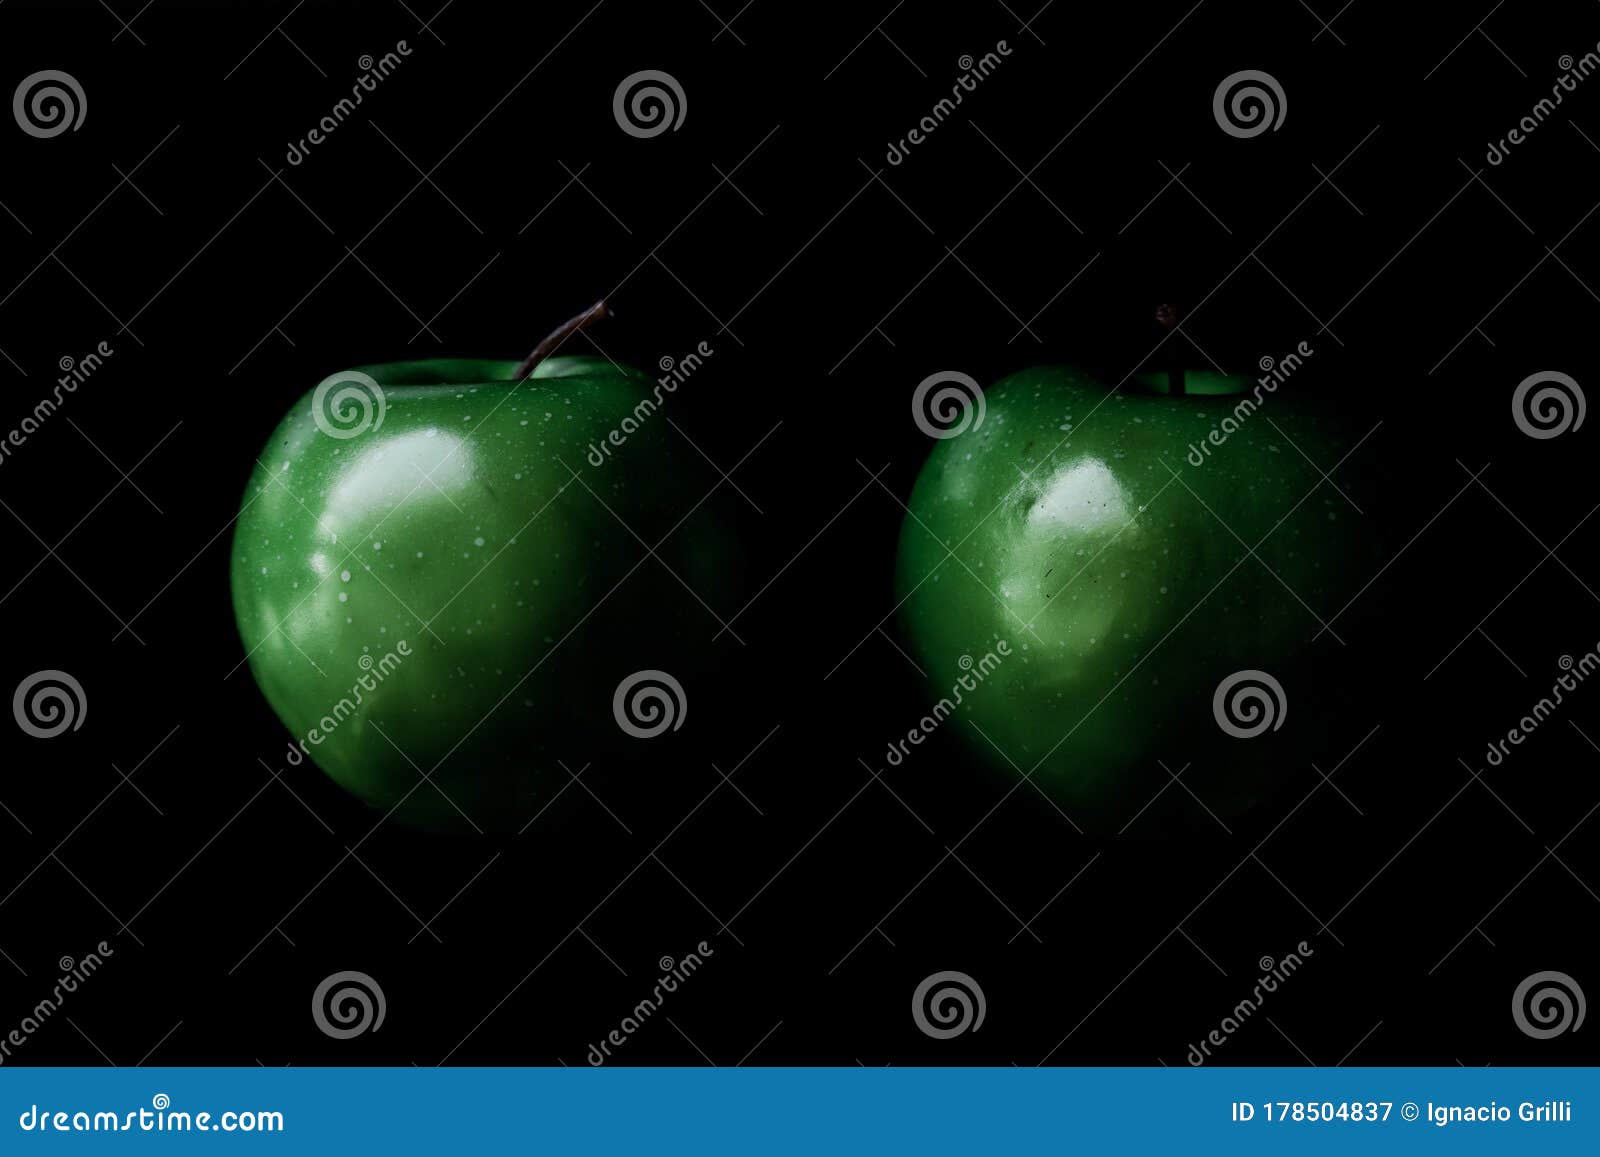 two green apples on black background